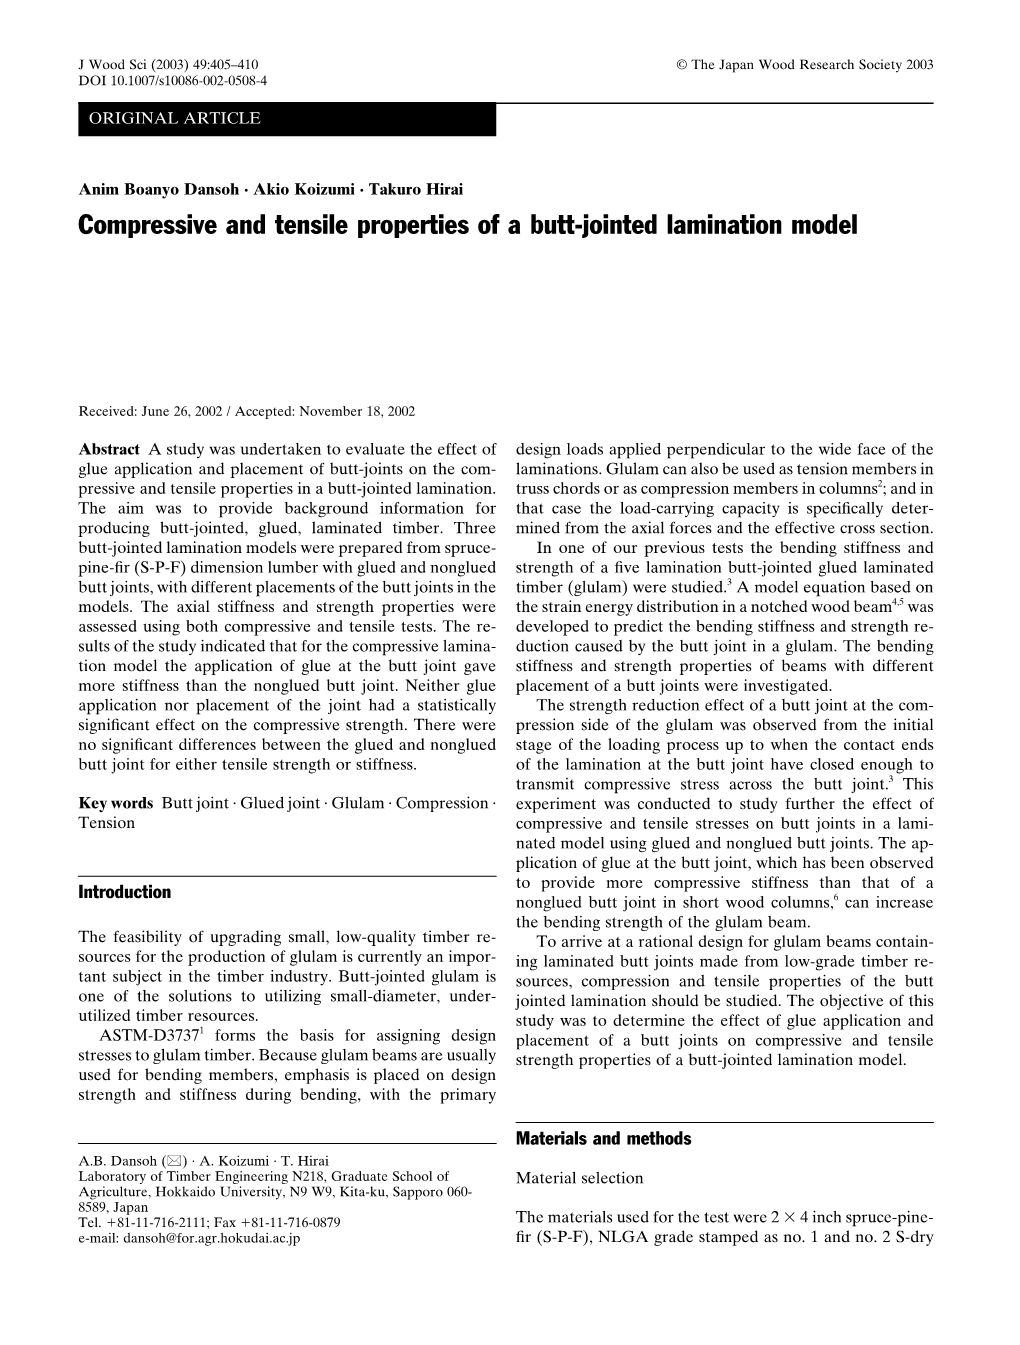 Compressive and Tensile Properties of a Butt-Jointed Lamination Model